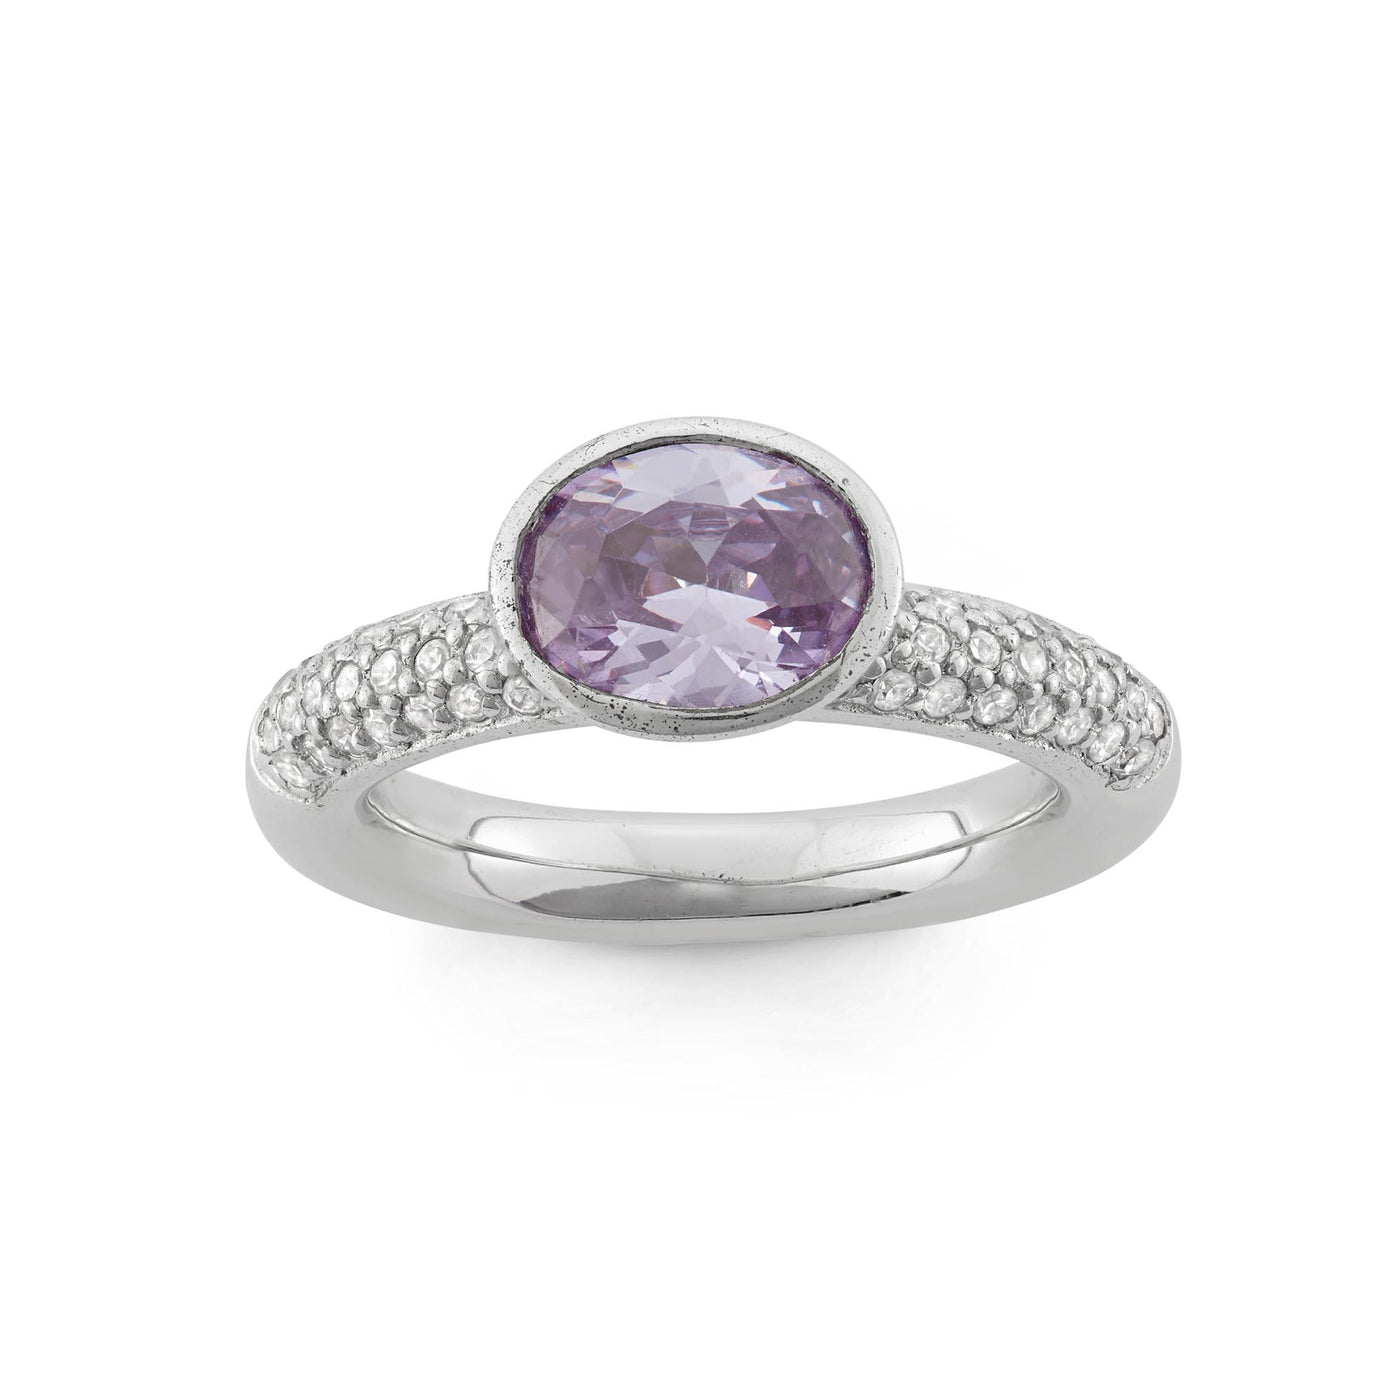 Rebecca Sloane Silver Ring With Pave White CZ and Amethyst CZ